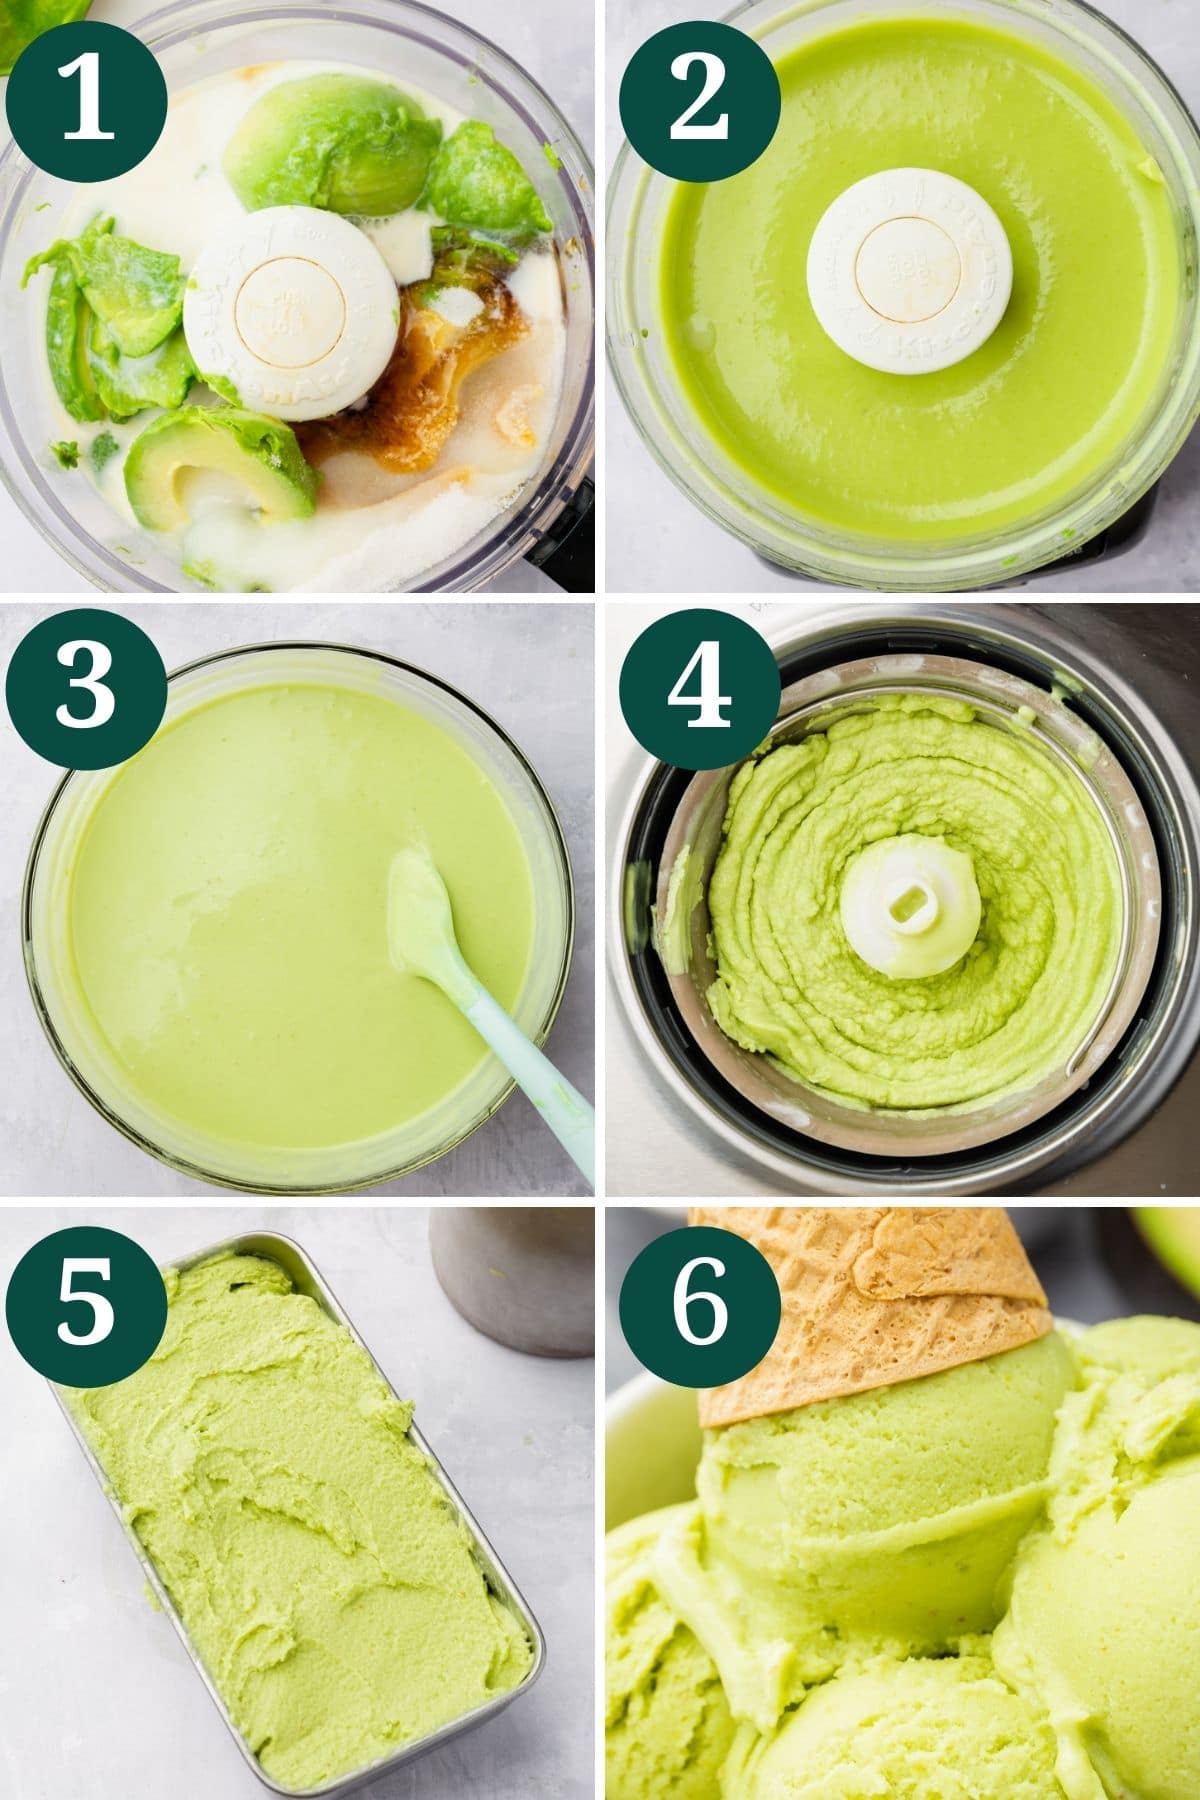 A collage showing the steps for making avocado ice cream. Image 1: avocados in a food processor. Image 2: Pureed avocados in a food processor. Image 3: Avocado ice cream base in a large glass bowl with a spatula. Image 4: Churned avocado ice cream in an ice cream maker. Image 5: Avocado ice cream in a loaf pan. Image 6: Scoops of avocado ice cream in a bowl with a cone on top.